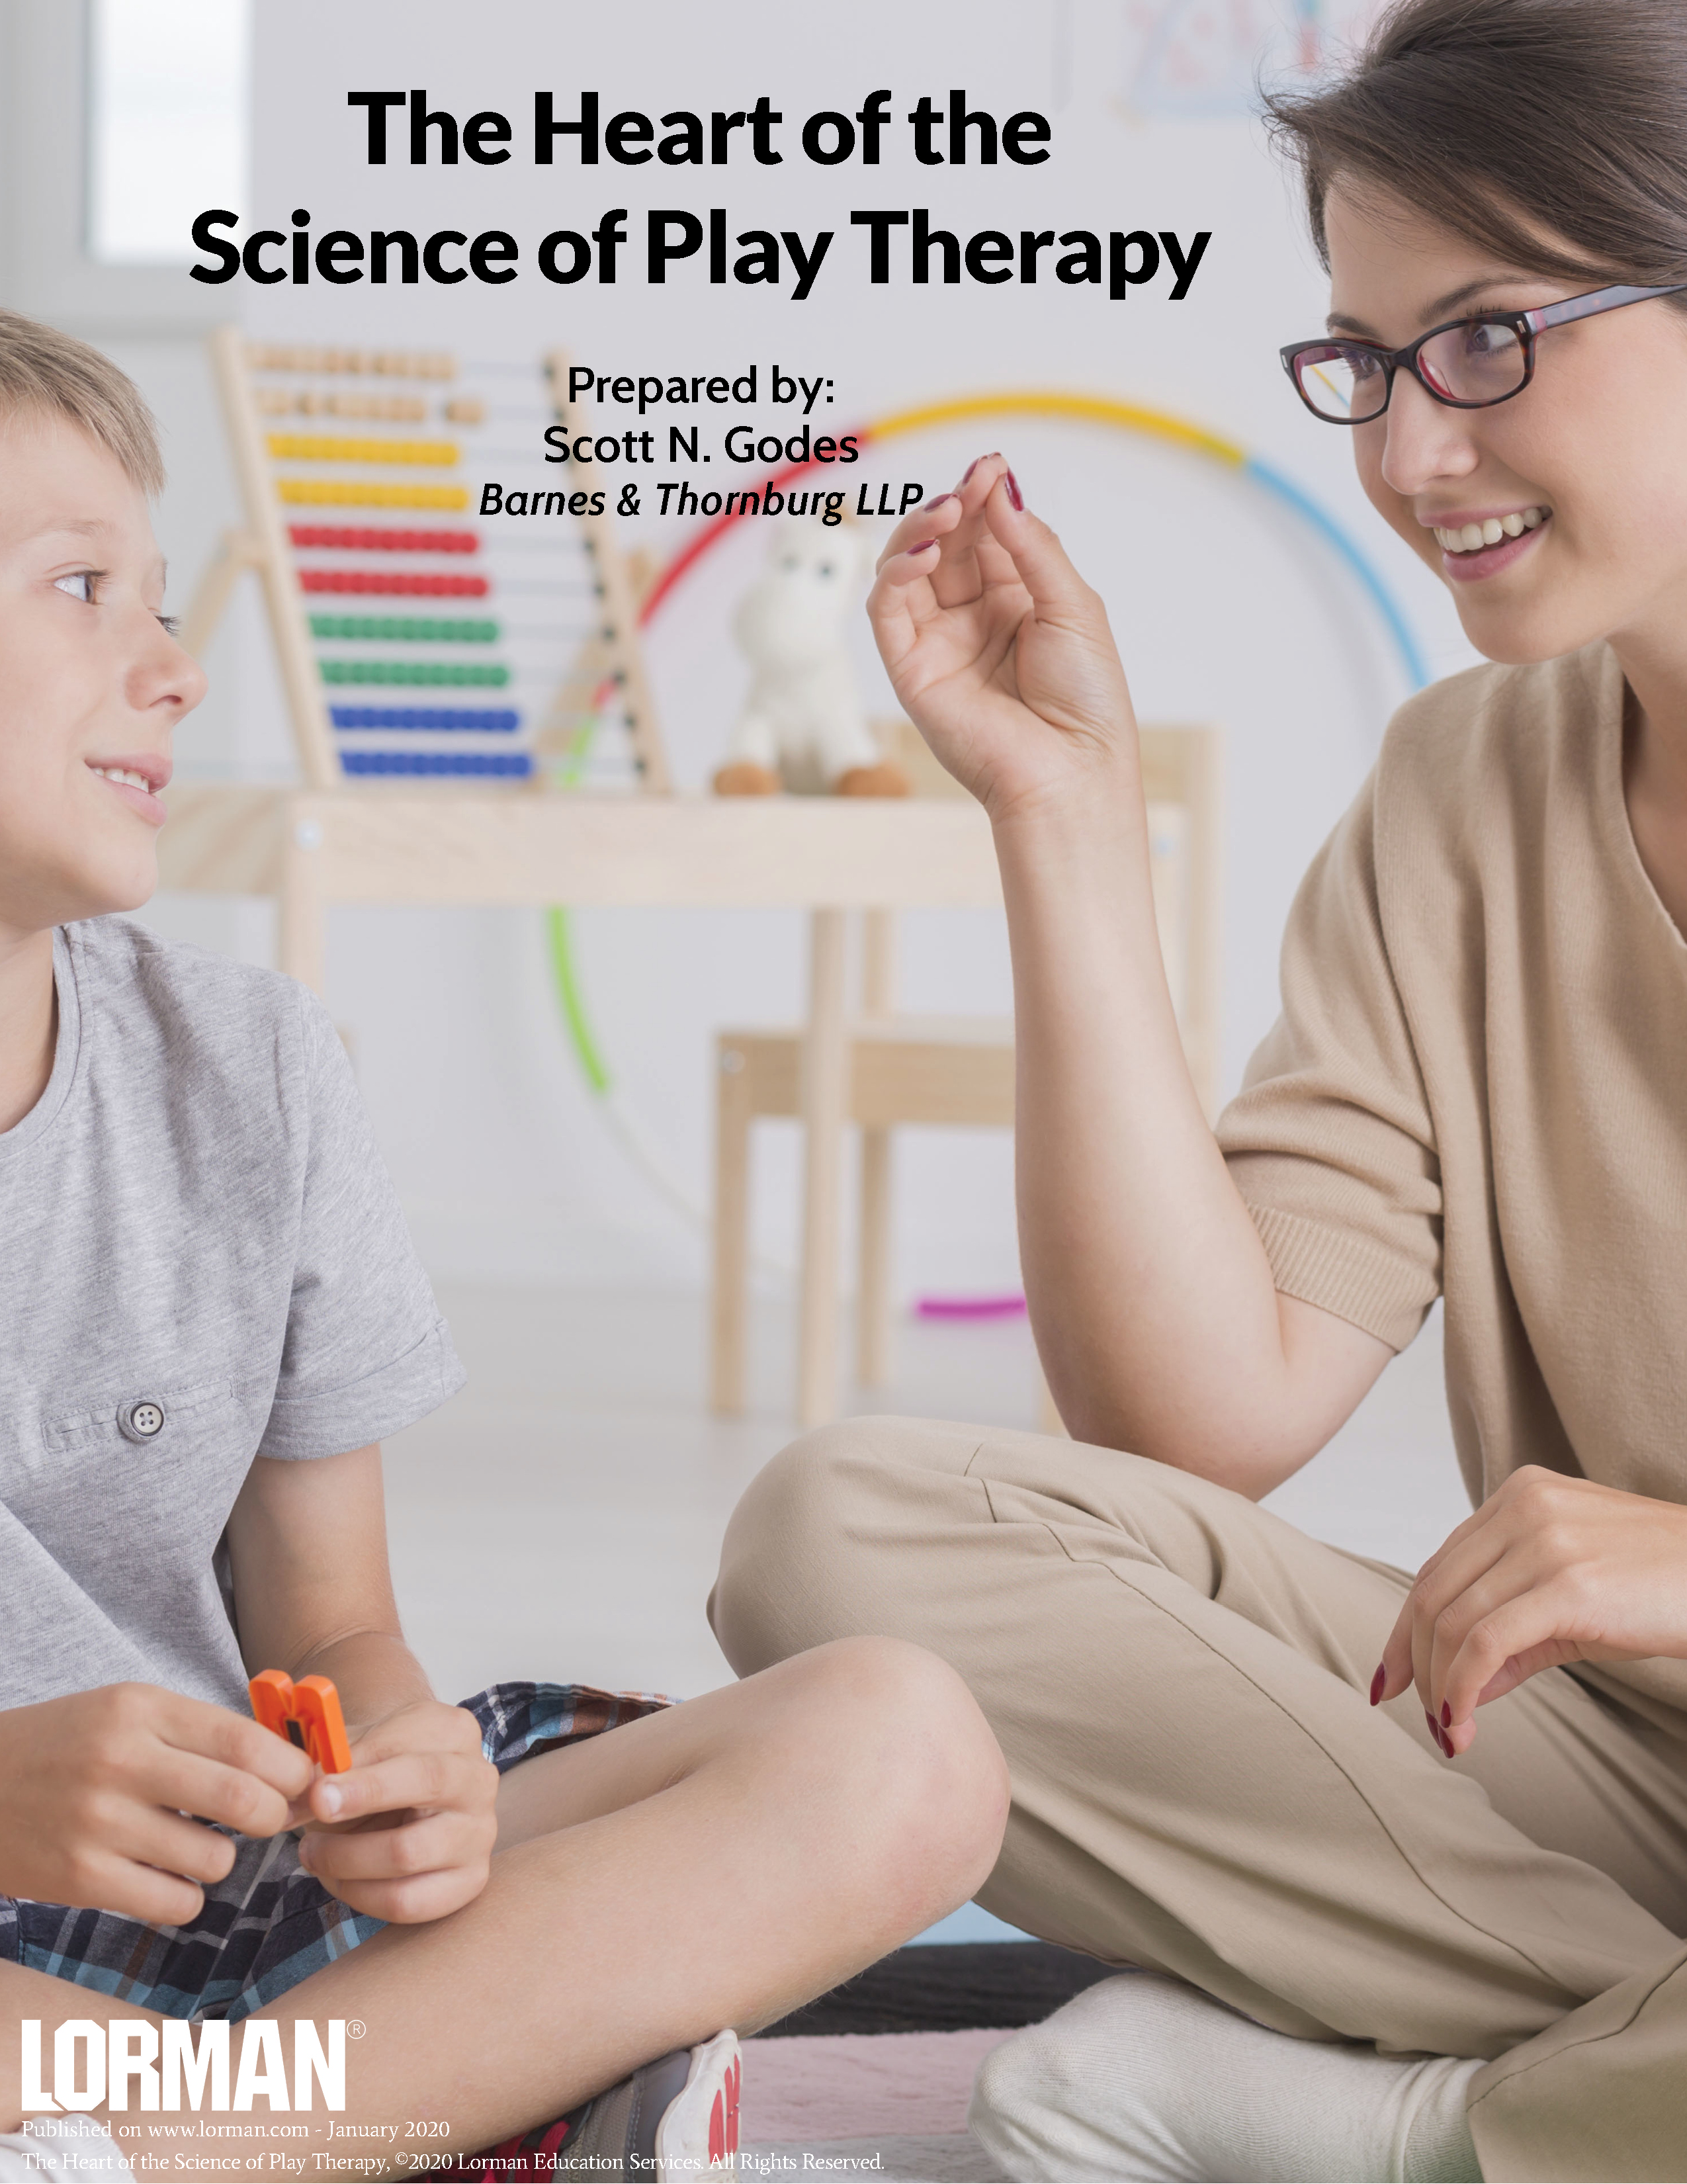 The Heart of the Science of Play Therapy